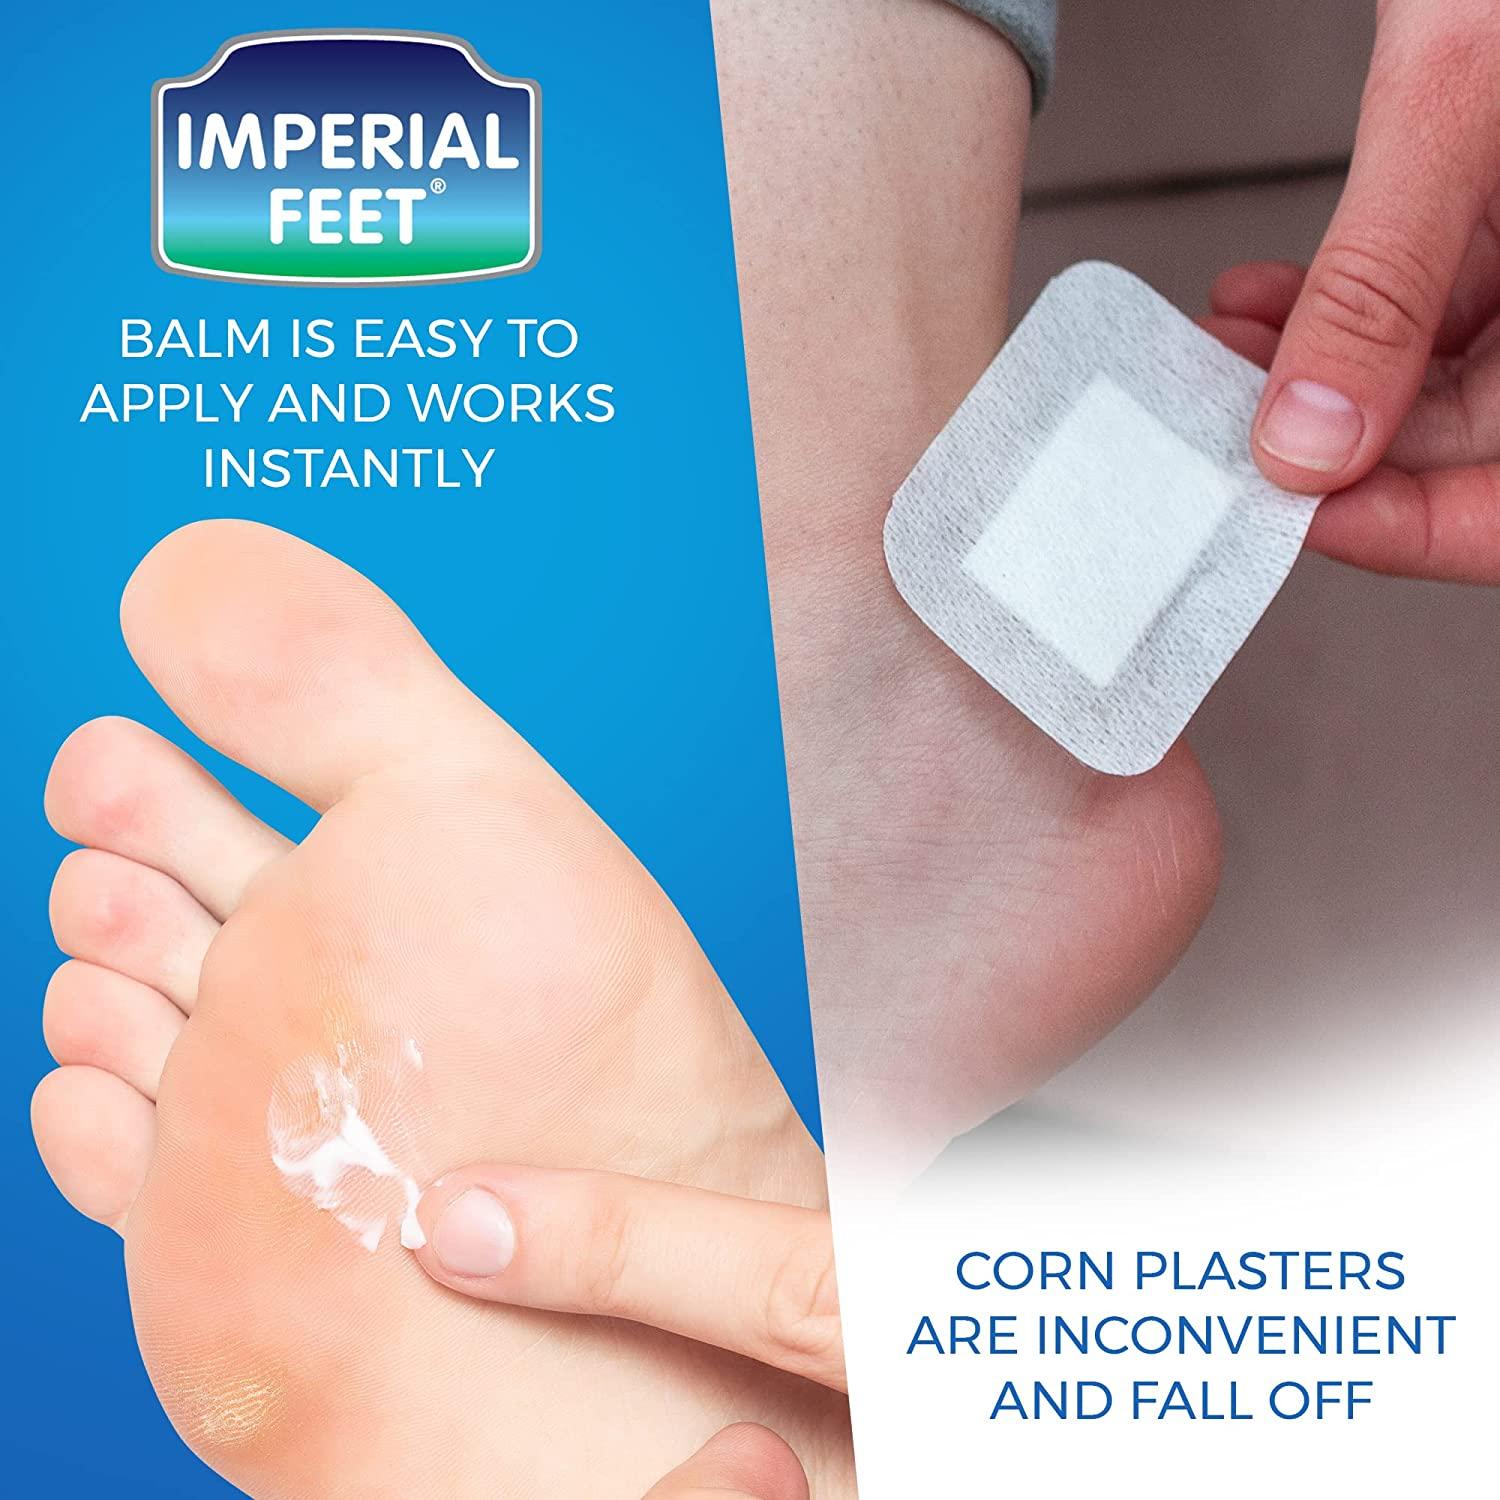 Foot Corn Removal — Bottom of Foot Callus Removal, by Ankle & Foot Centers  of America